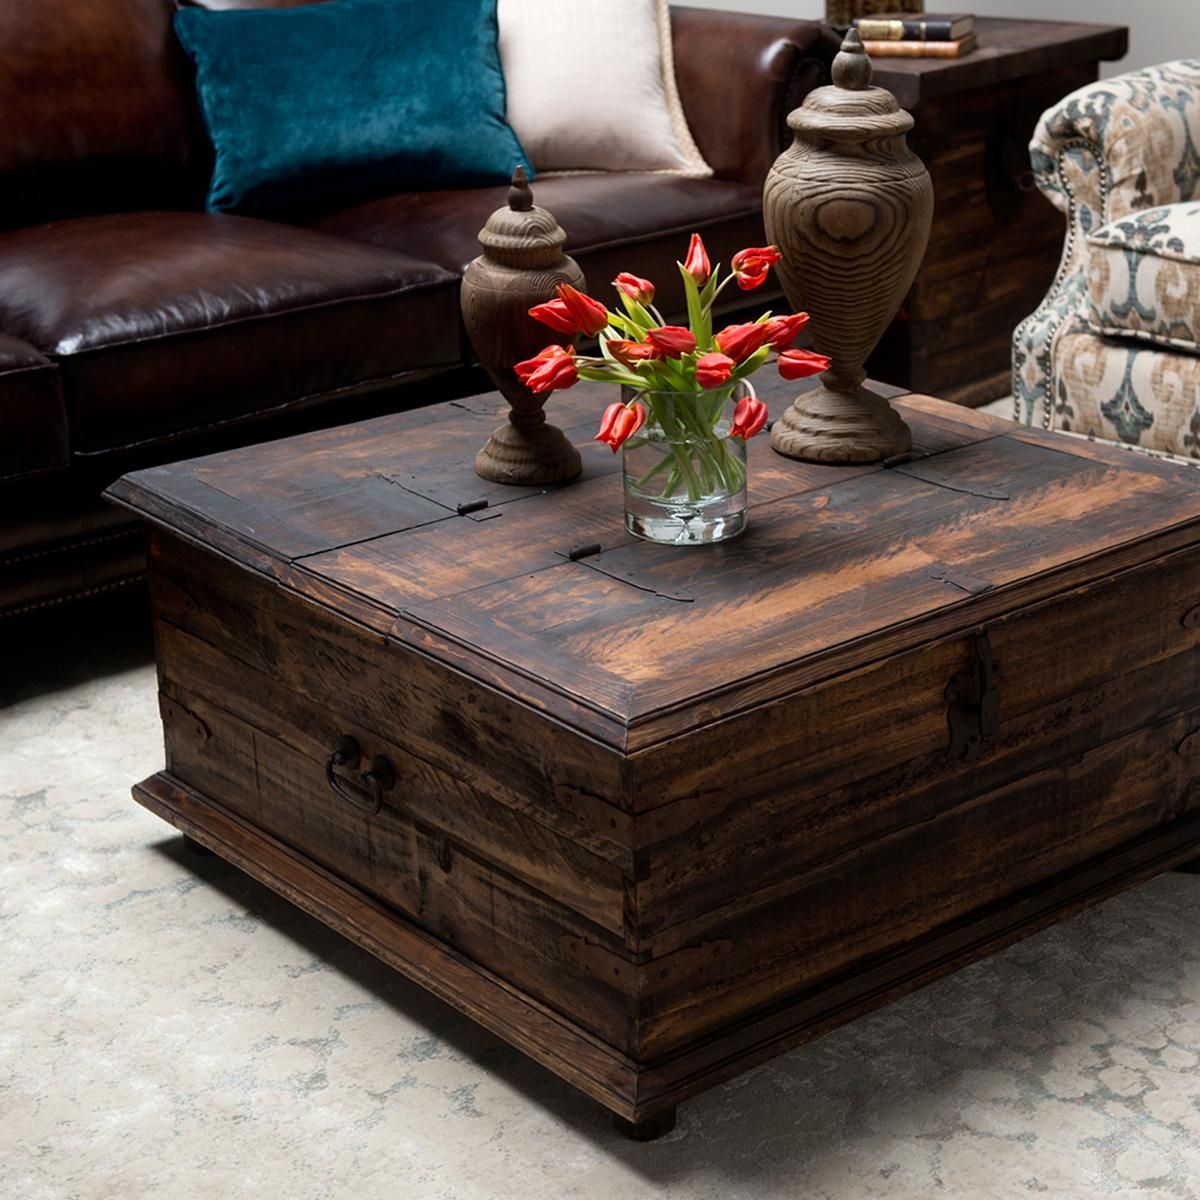 Rustic Trunk Coffee Table For Your Living Room – Homes Furniture Ideas With Rustic Wood Coffee Tables (Gallery 10 of 21)